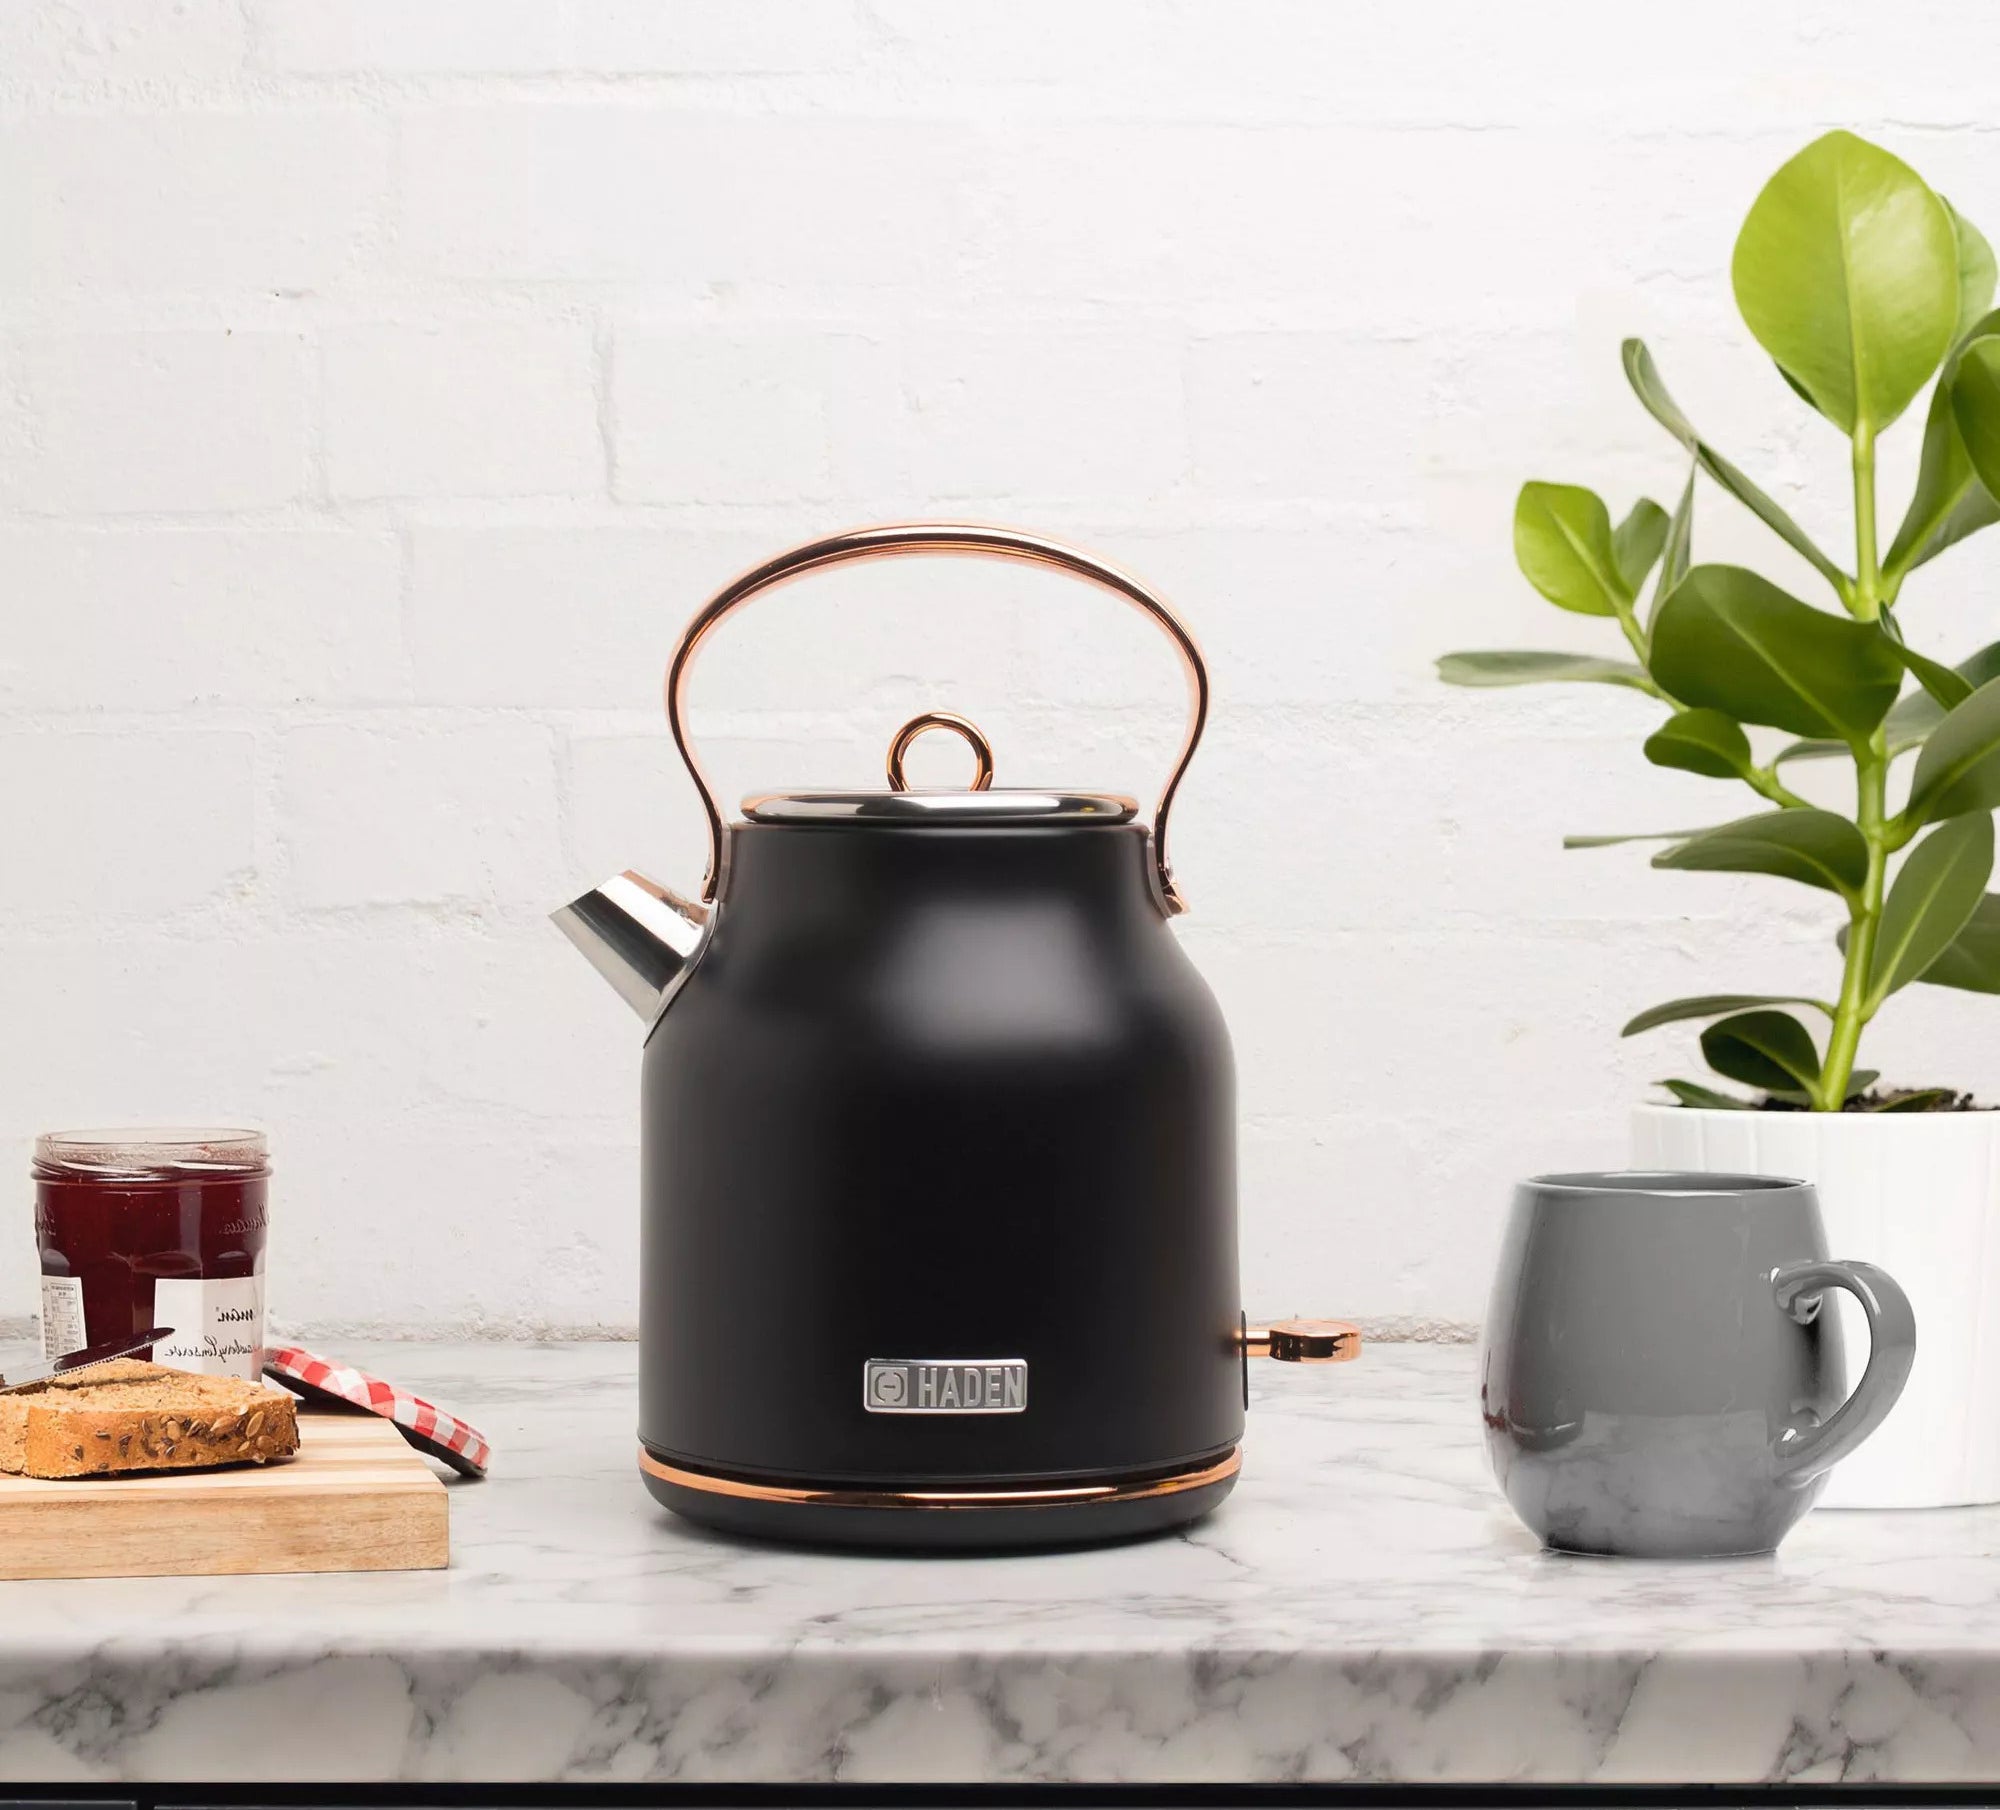 The kettle in matte black with copper accents